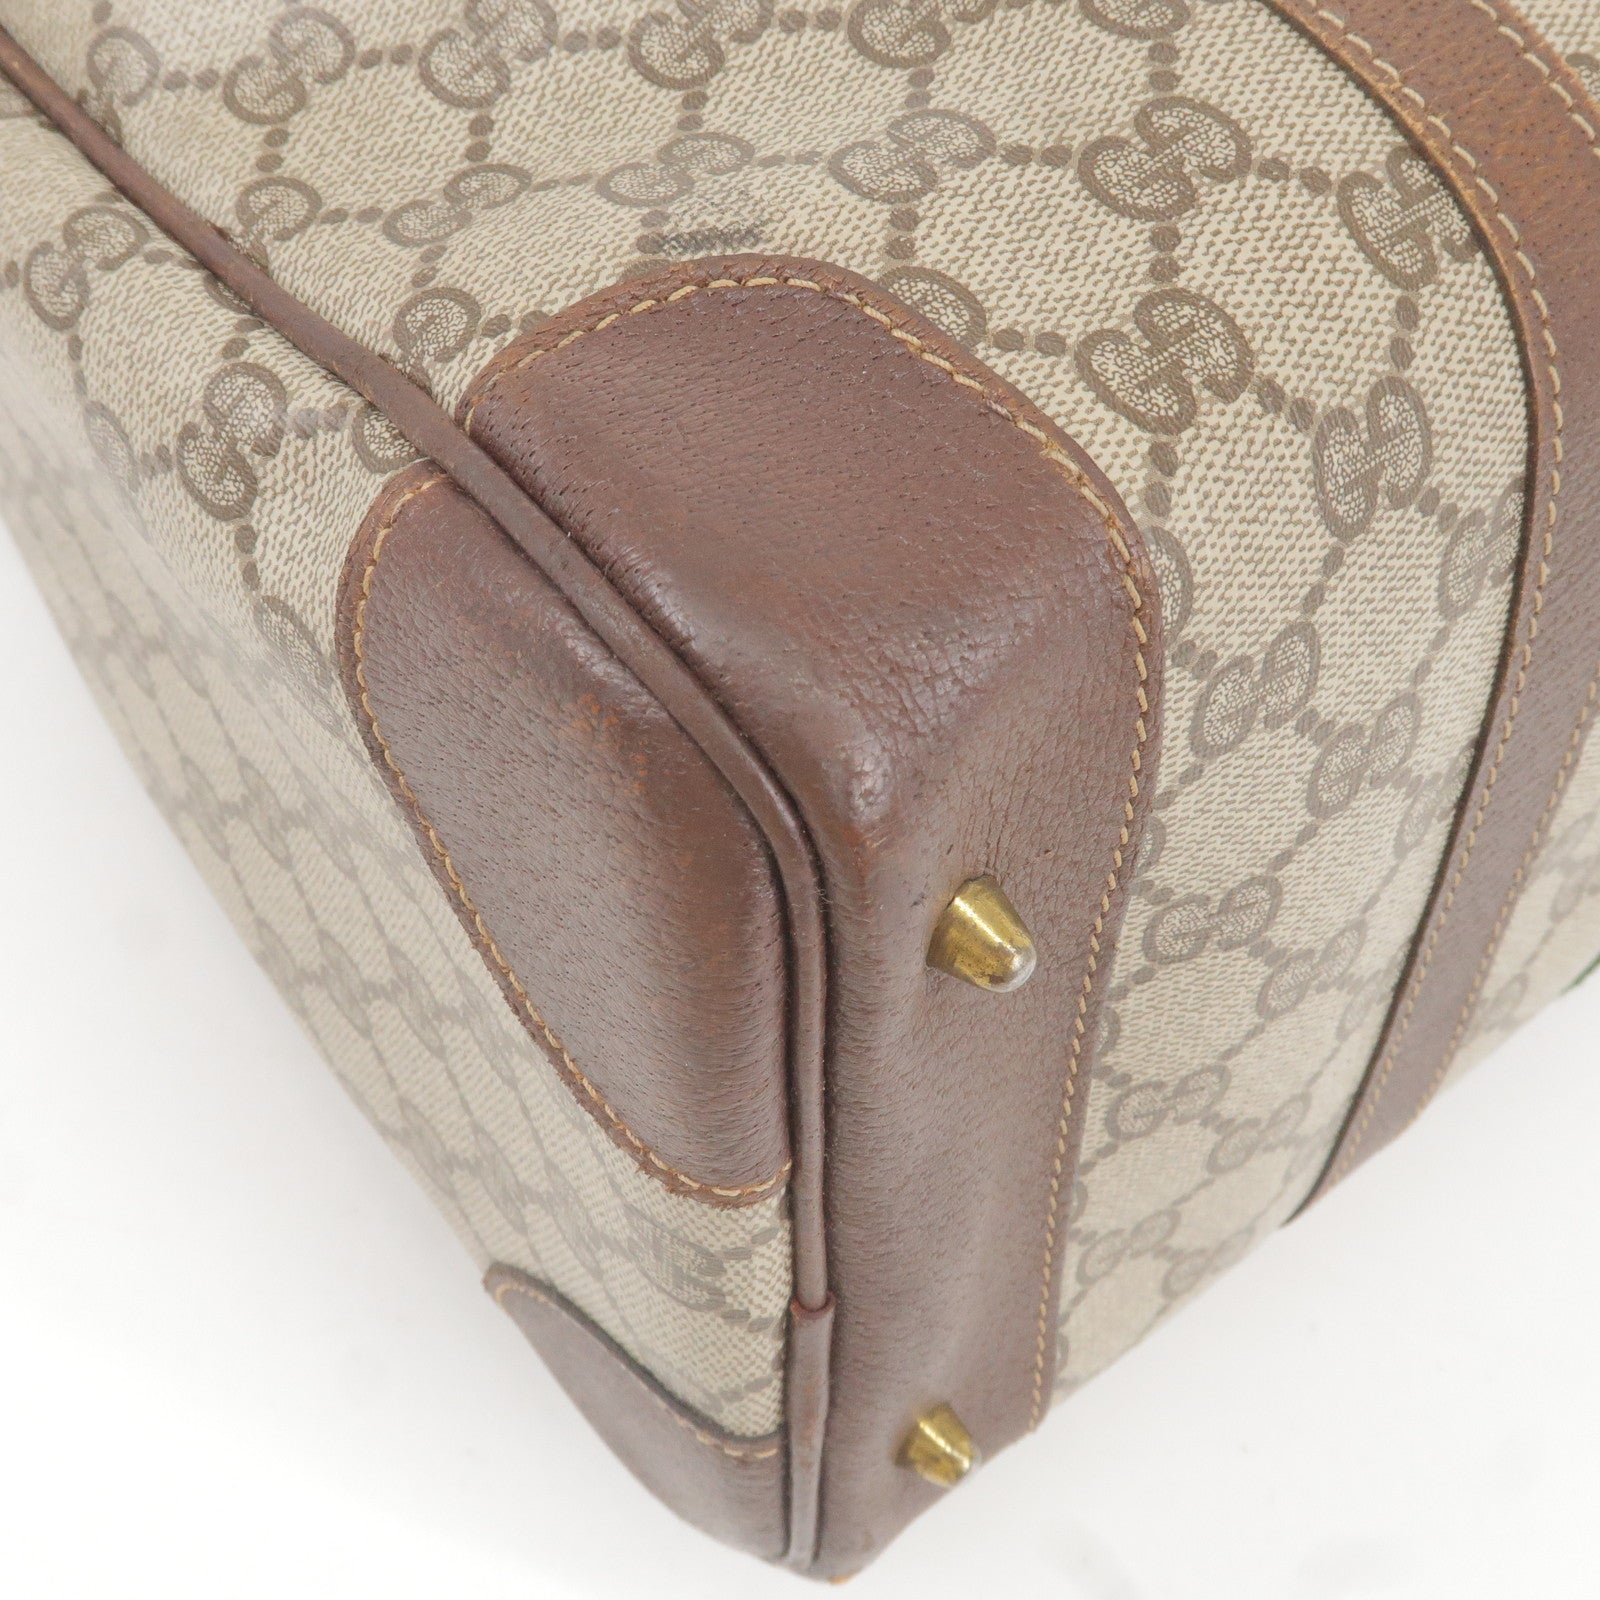 Gucci Beige/Brown GG Canvas and Leather Medium Vintage Web Boston